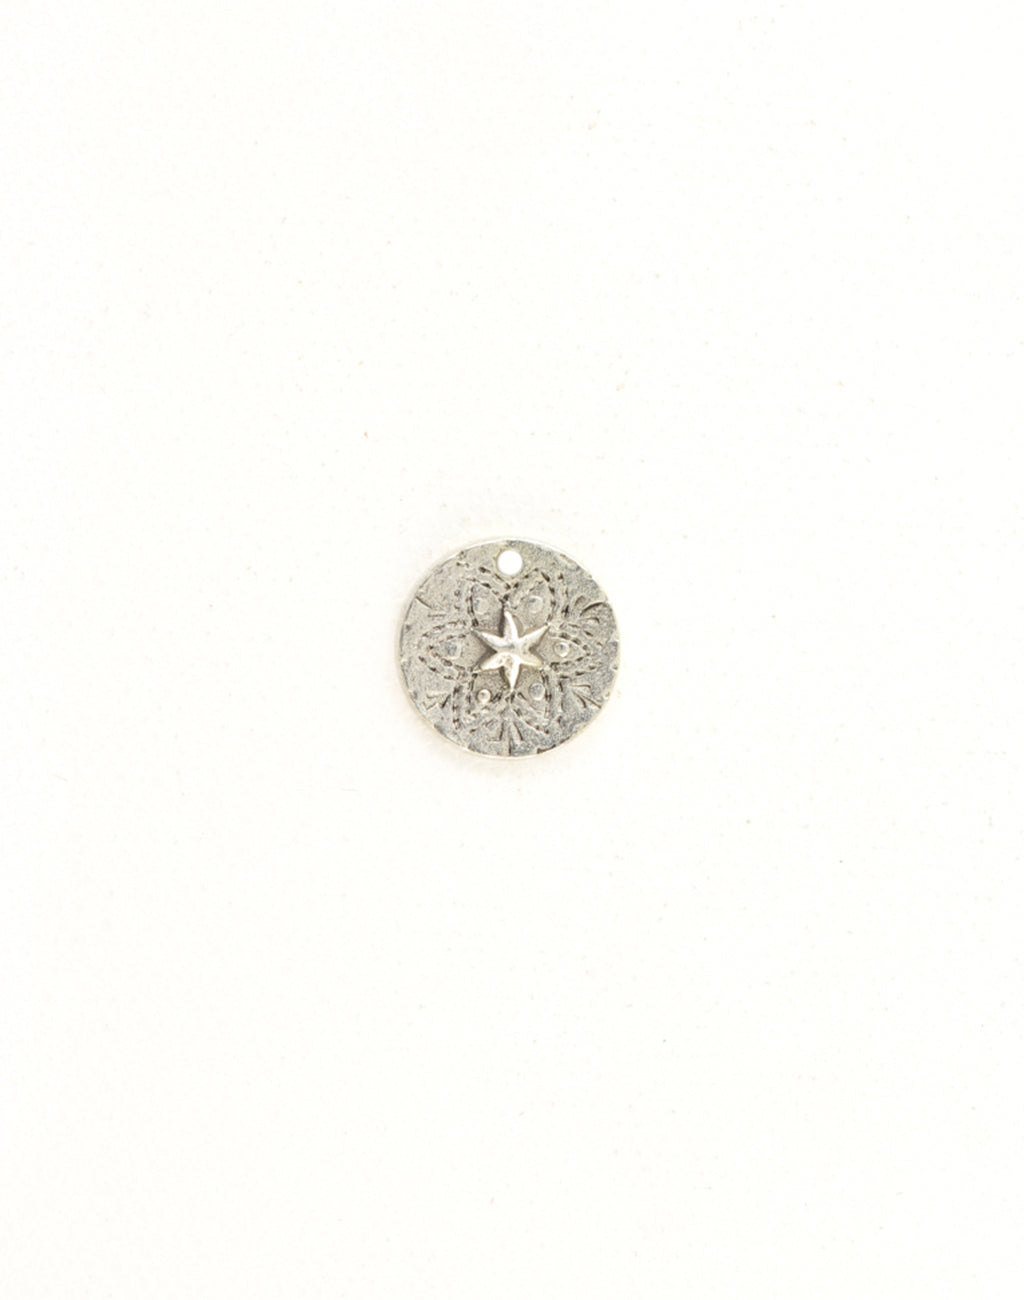 Star Coin, 15mm, (1pc)